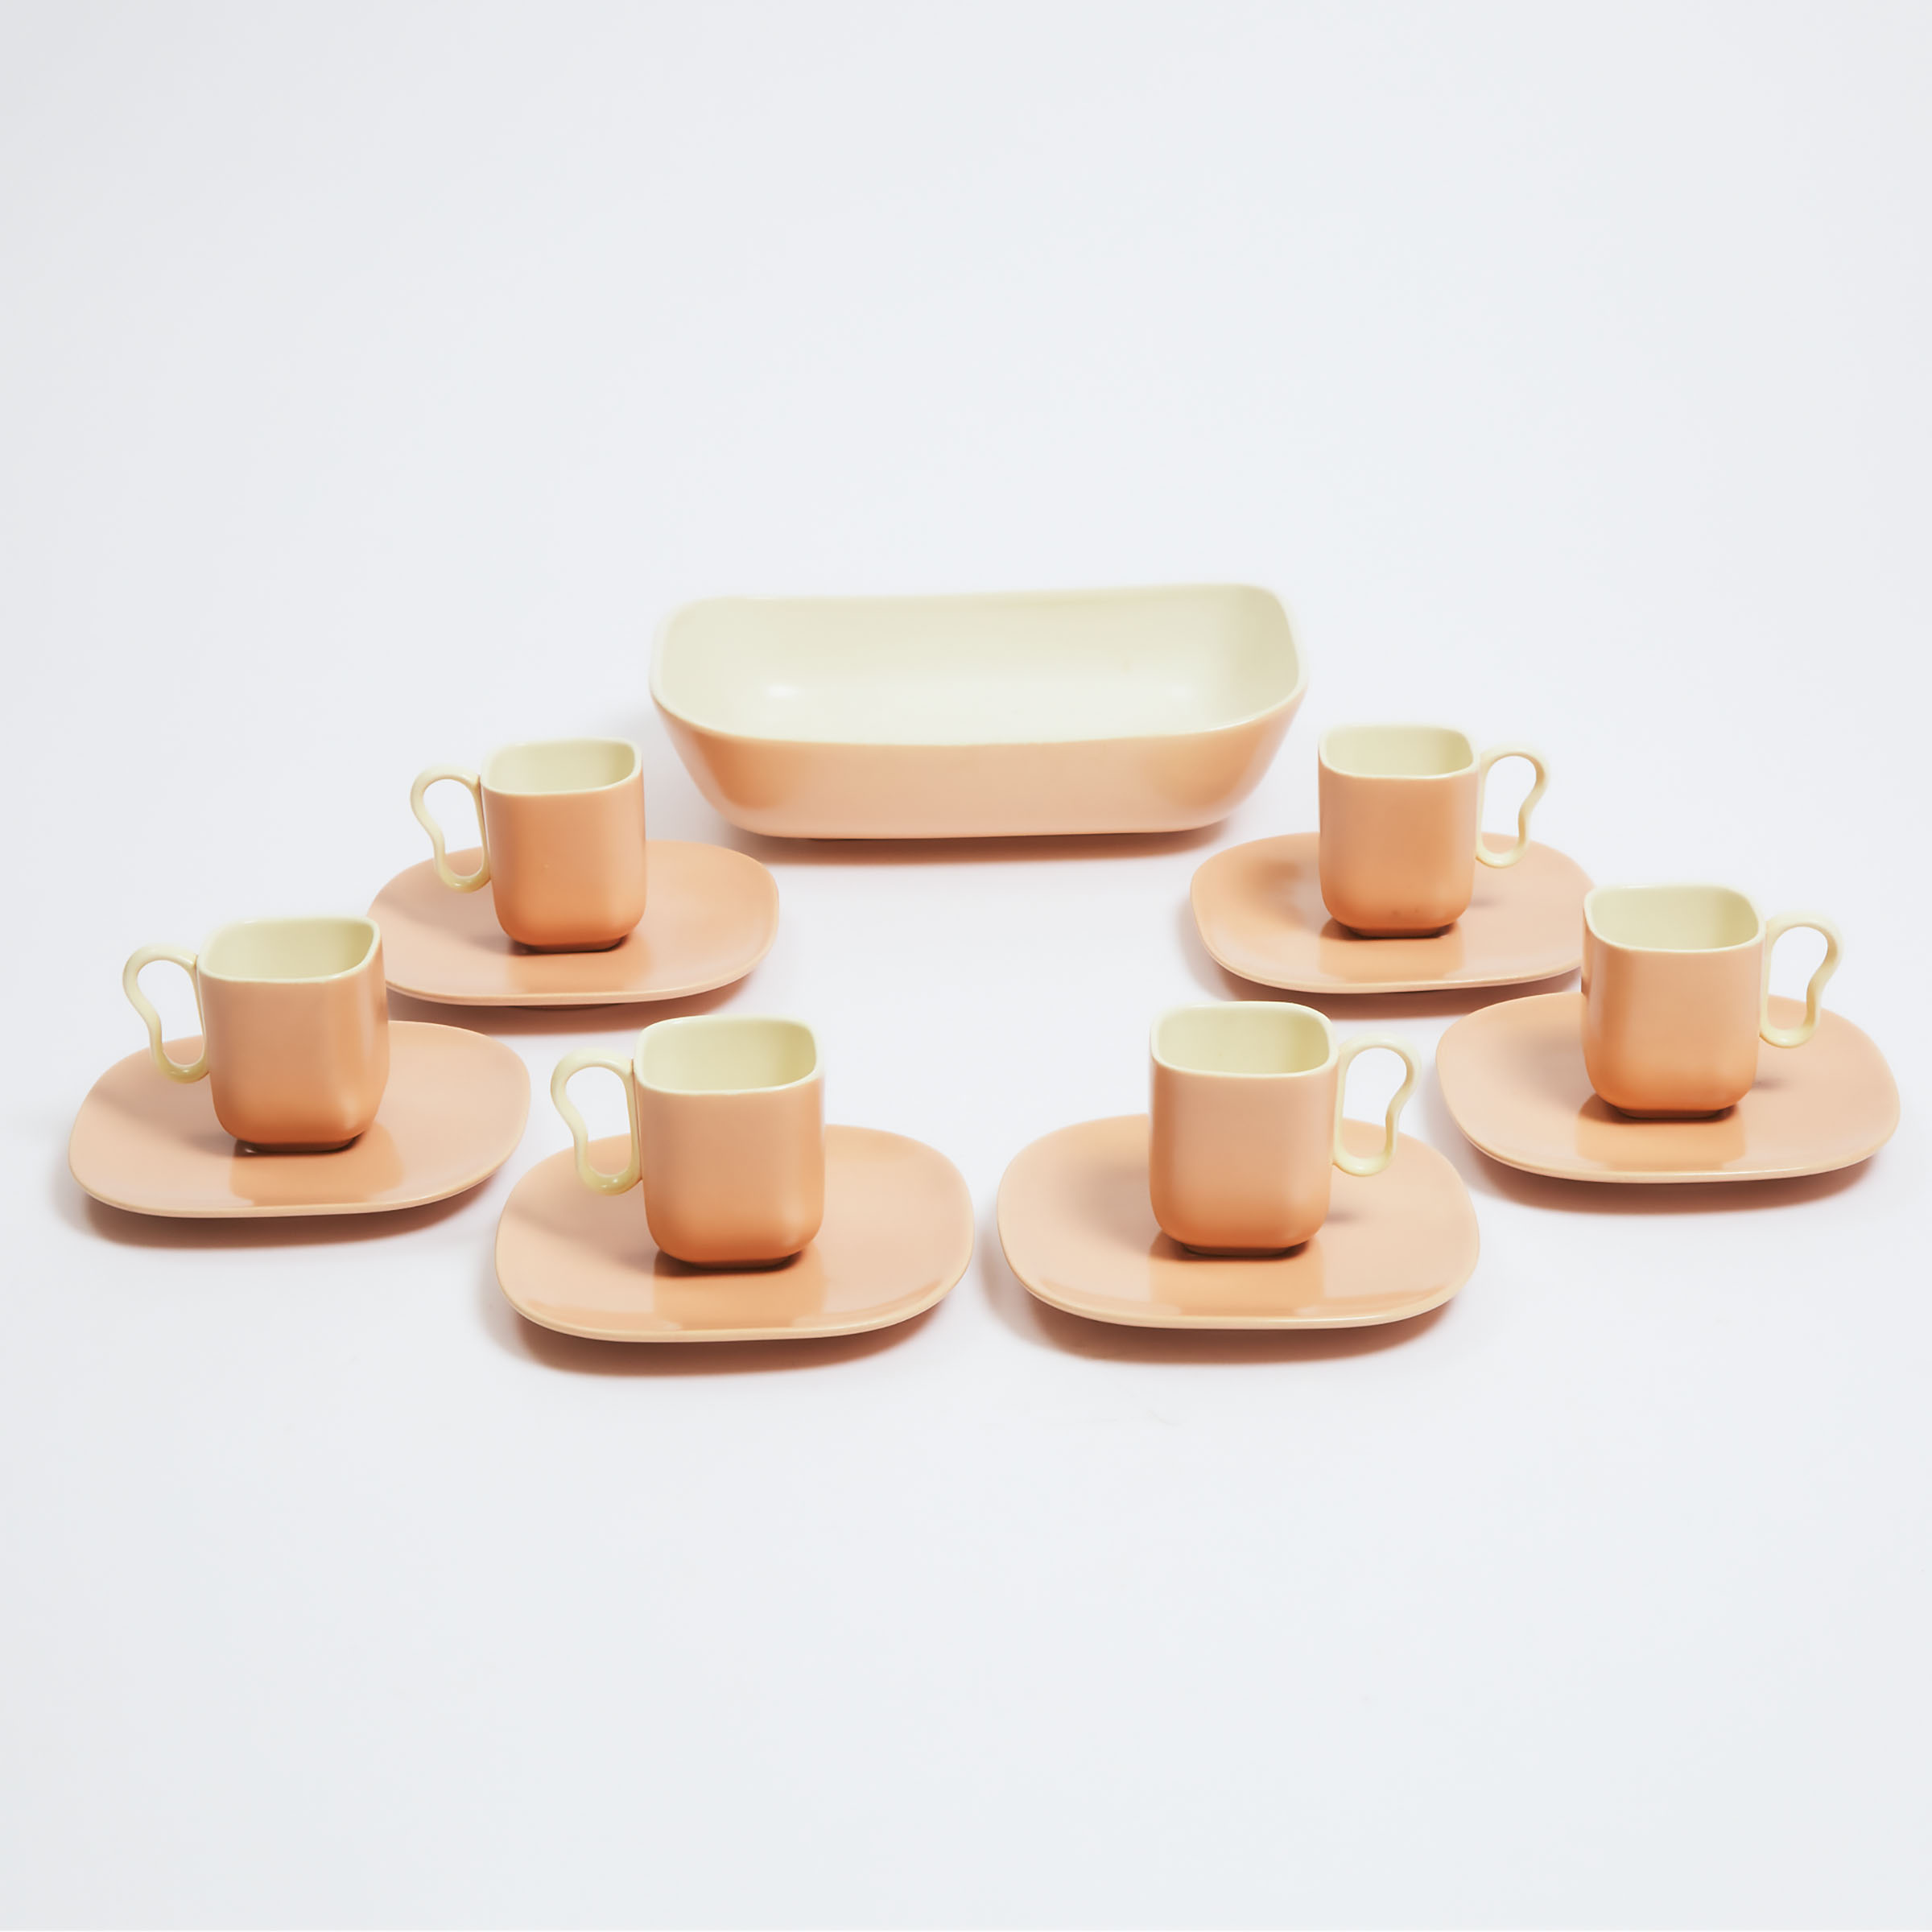 Six Franciscan Cups and Saucers and a Serving Dish, mid-20th century